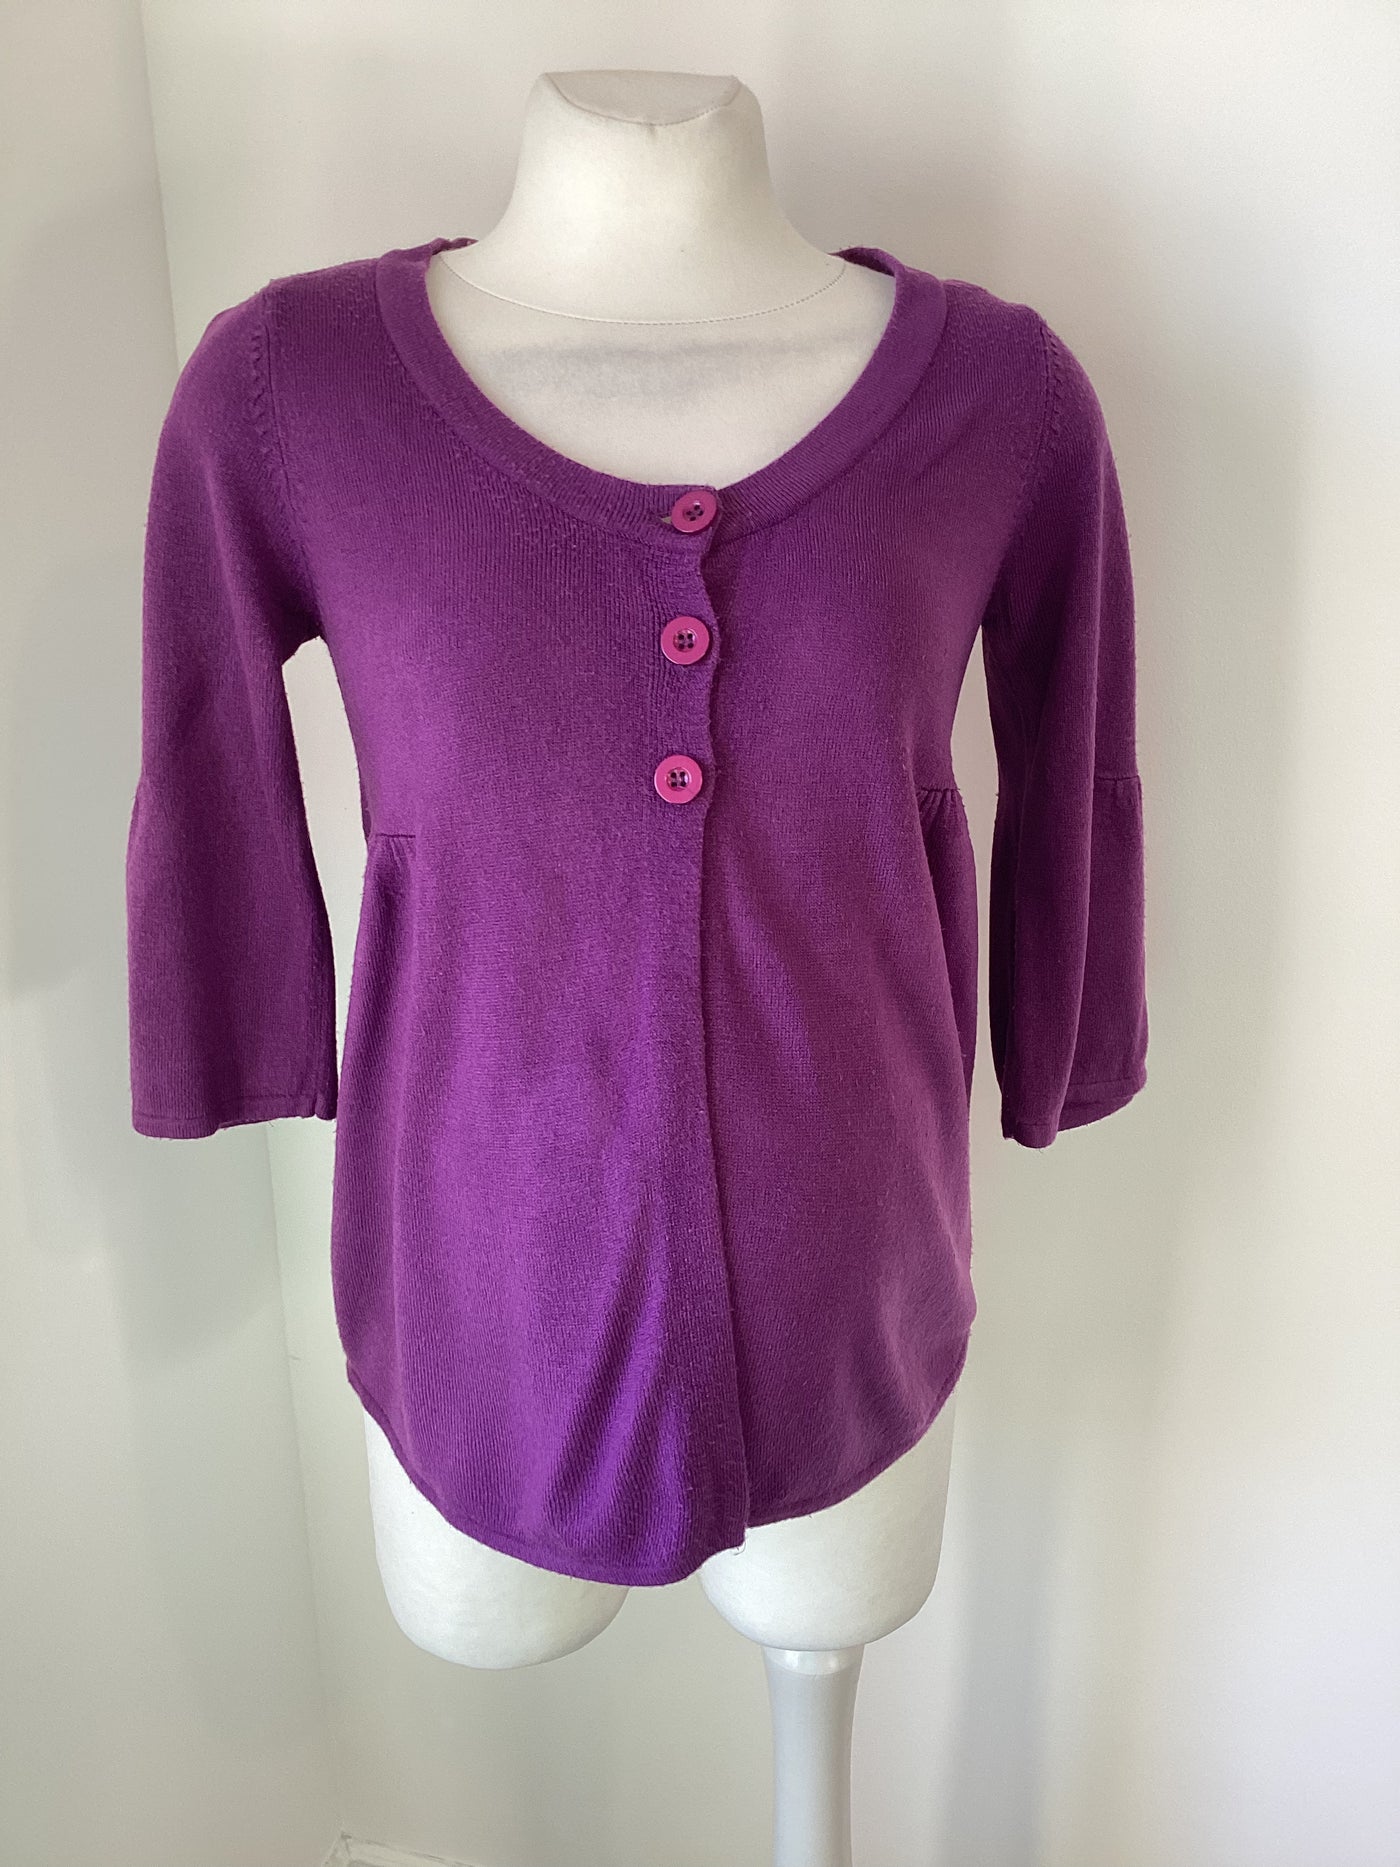 Dorothy Perkins Maternity purple cardigan with 3/4 length bell sleeves - Size 10